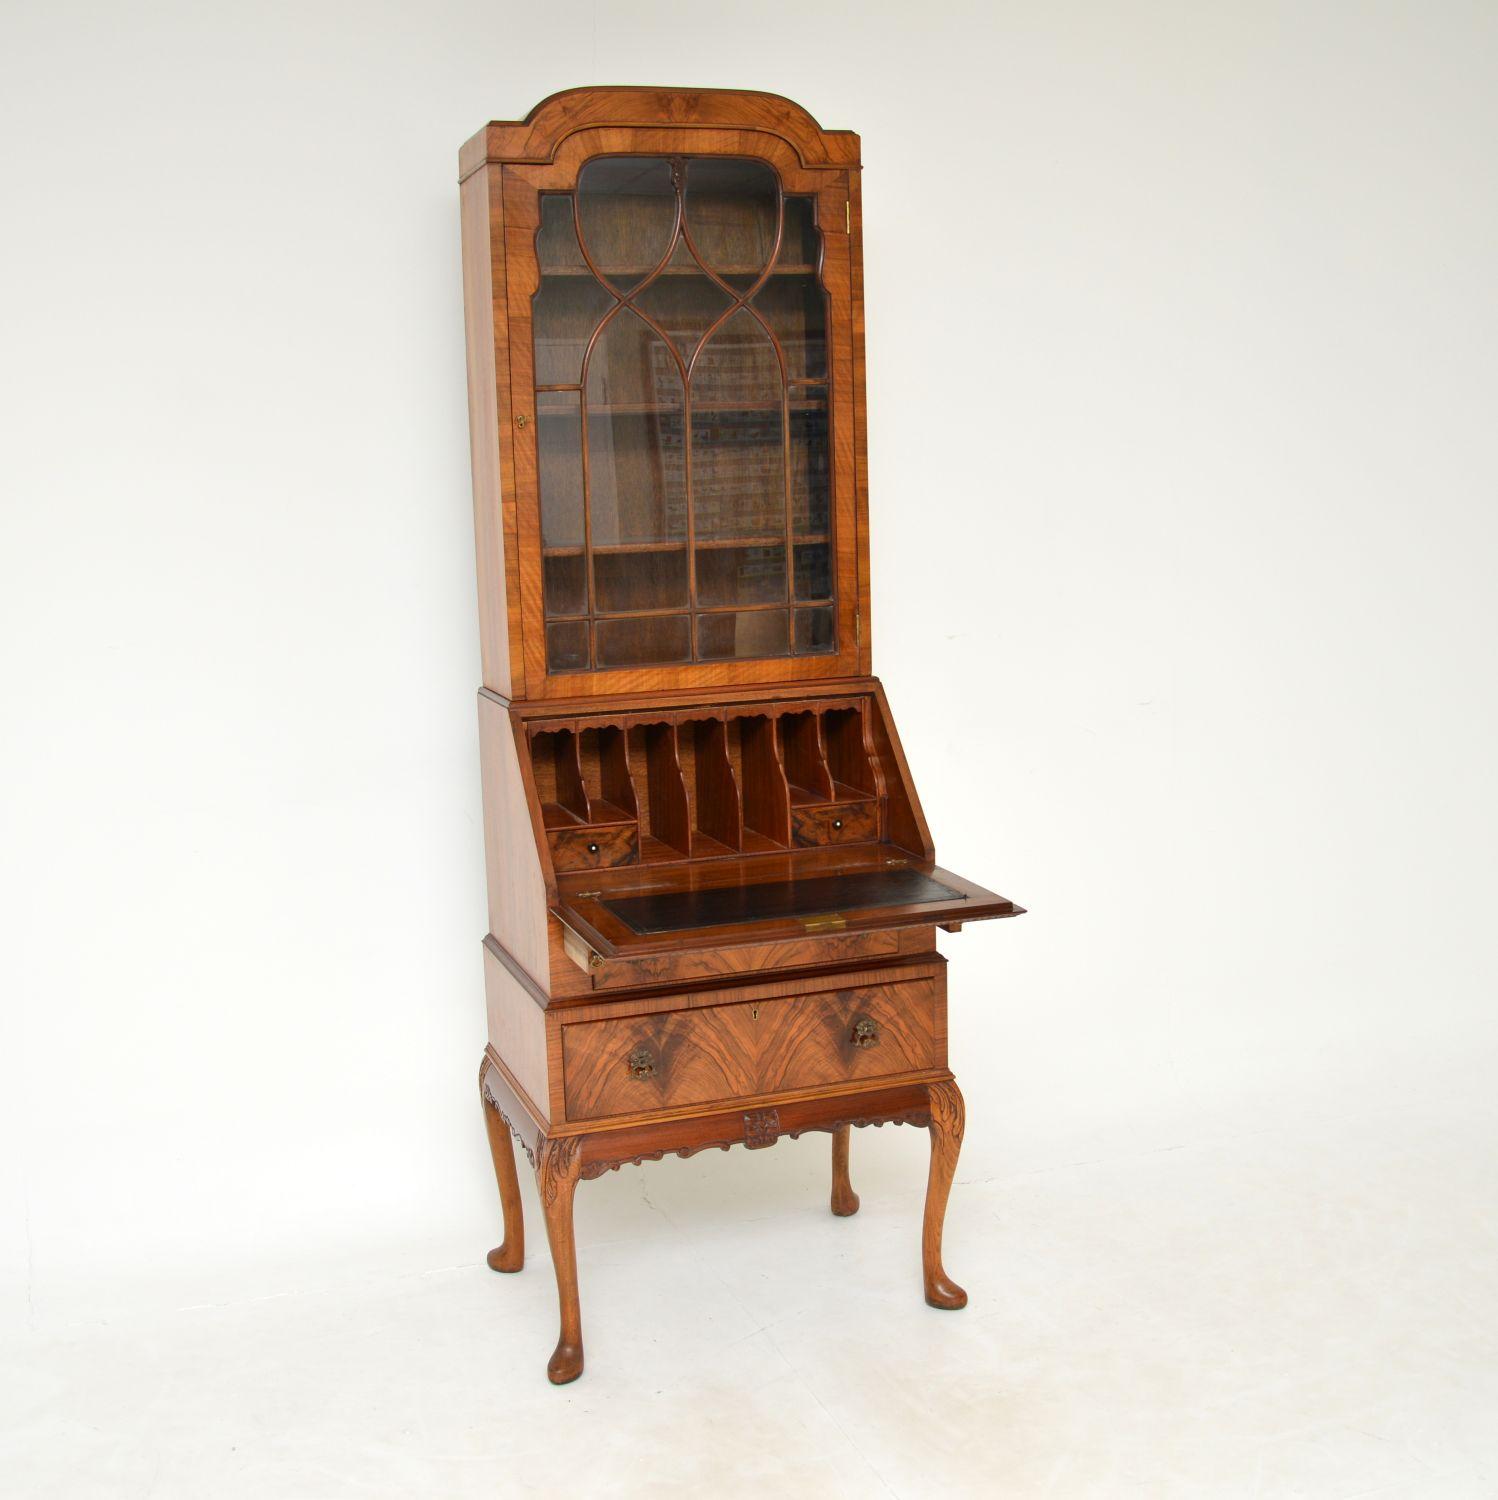 A stunning antique bureau bookcase of slim proportions in book matched figured walnut. This was made in England & dates from around the 1900-1910 period.
It is of superb quality and is a very useful size. It takes up very little floor space, yet